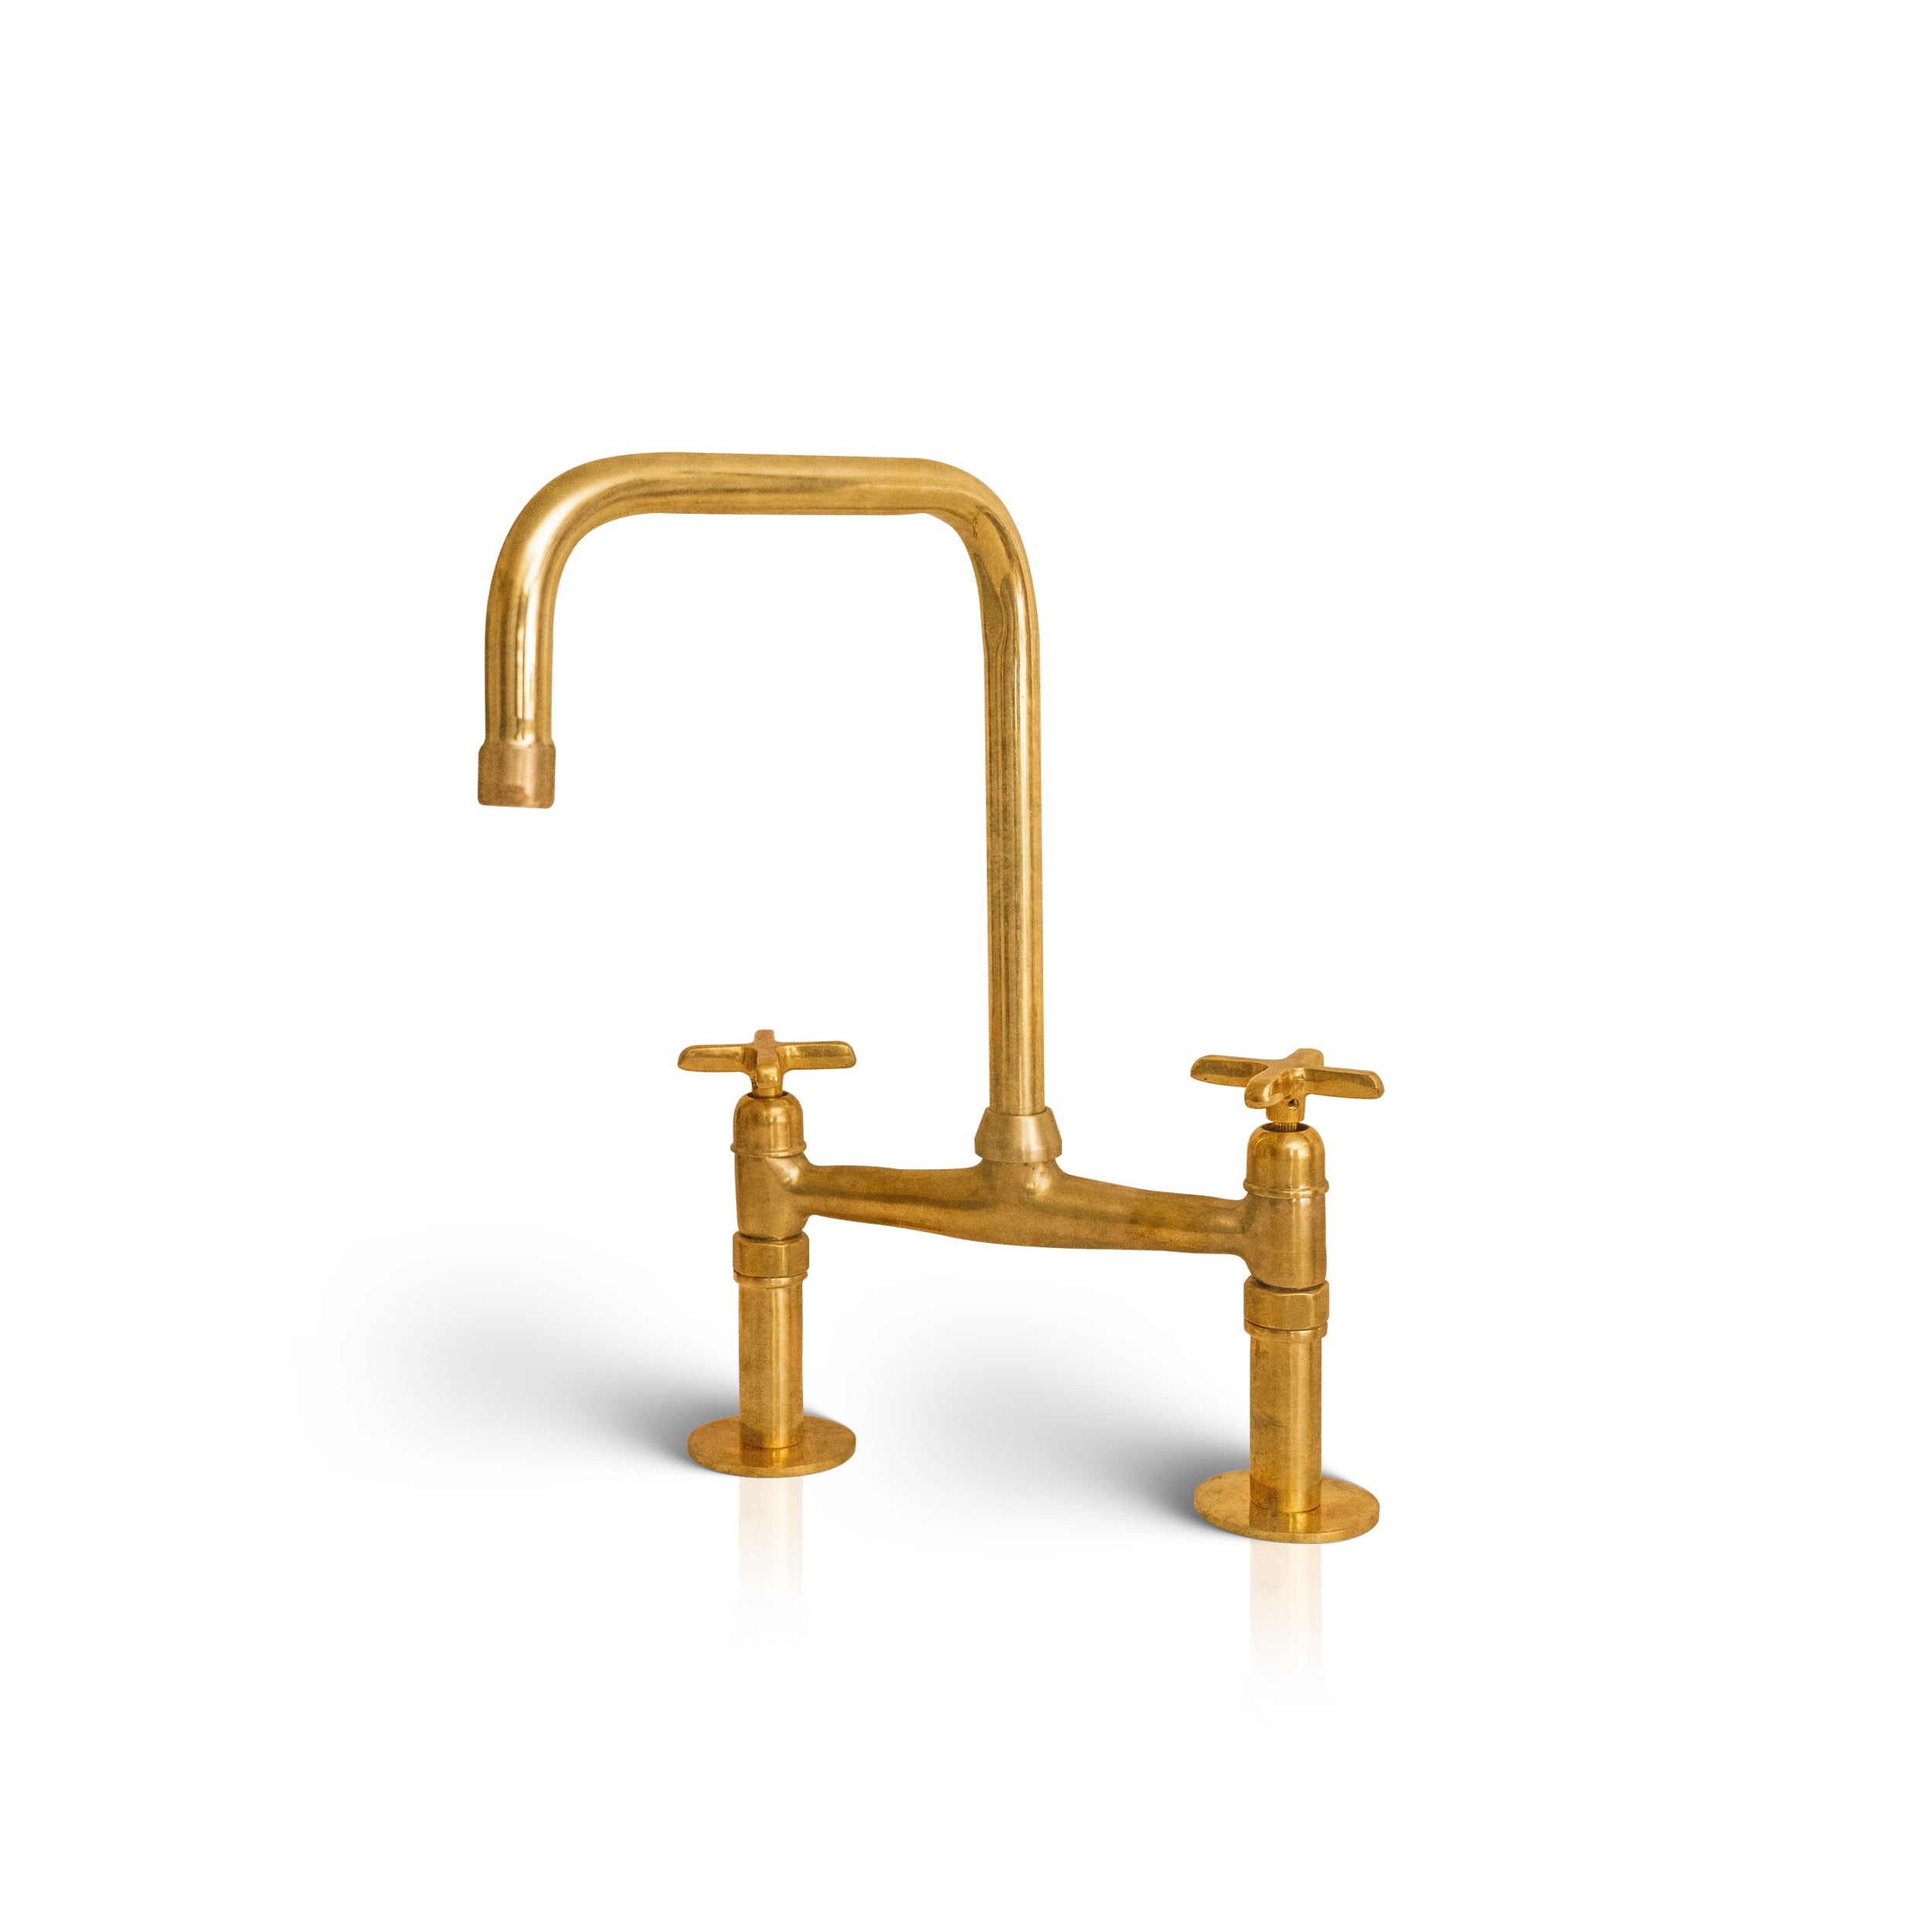 Unlacquered solid brass 8" Brass Bridge faucet with square spout - Zayian